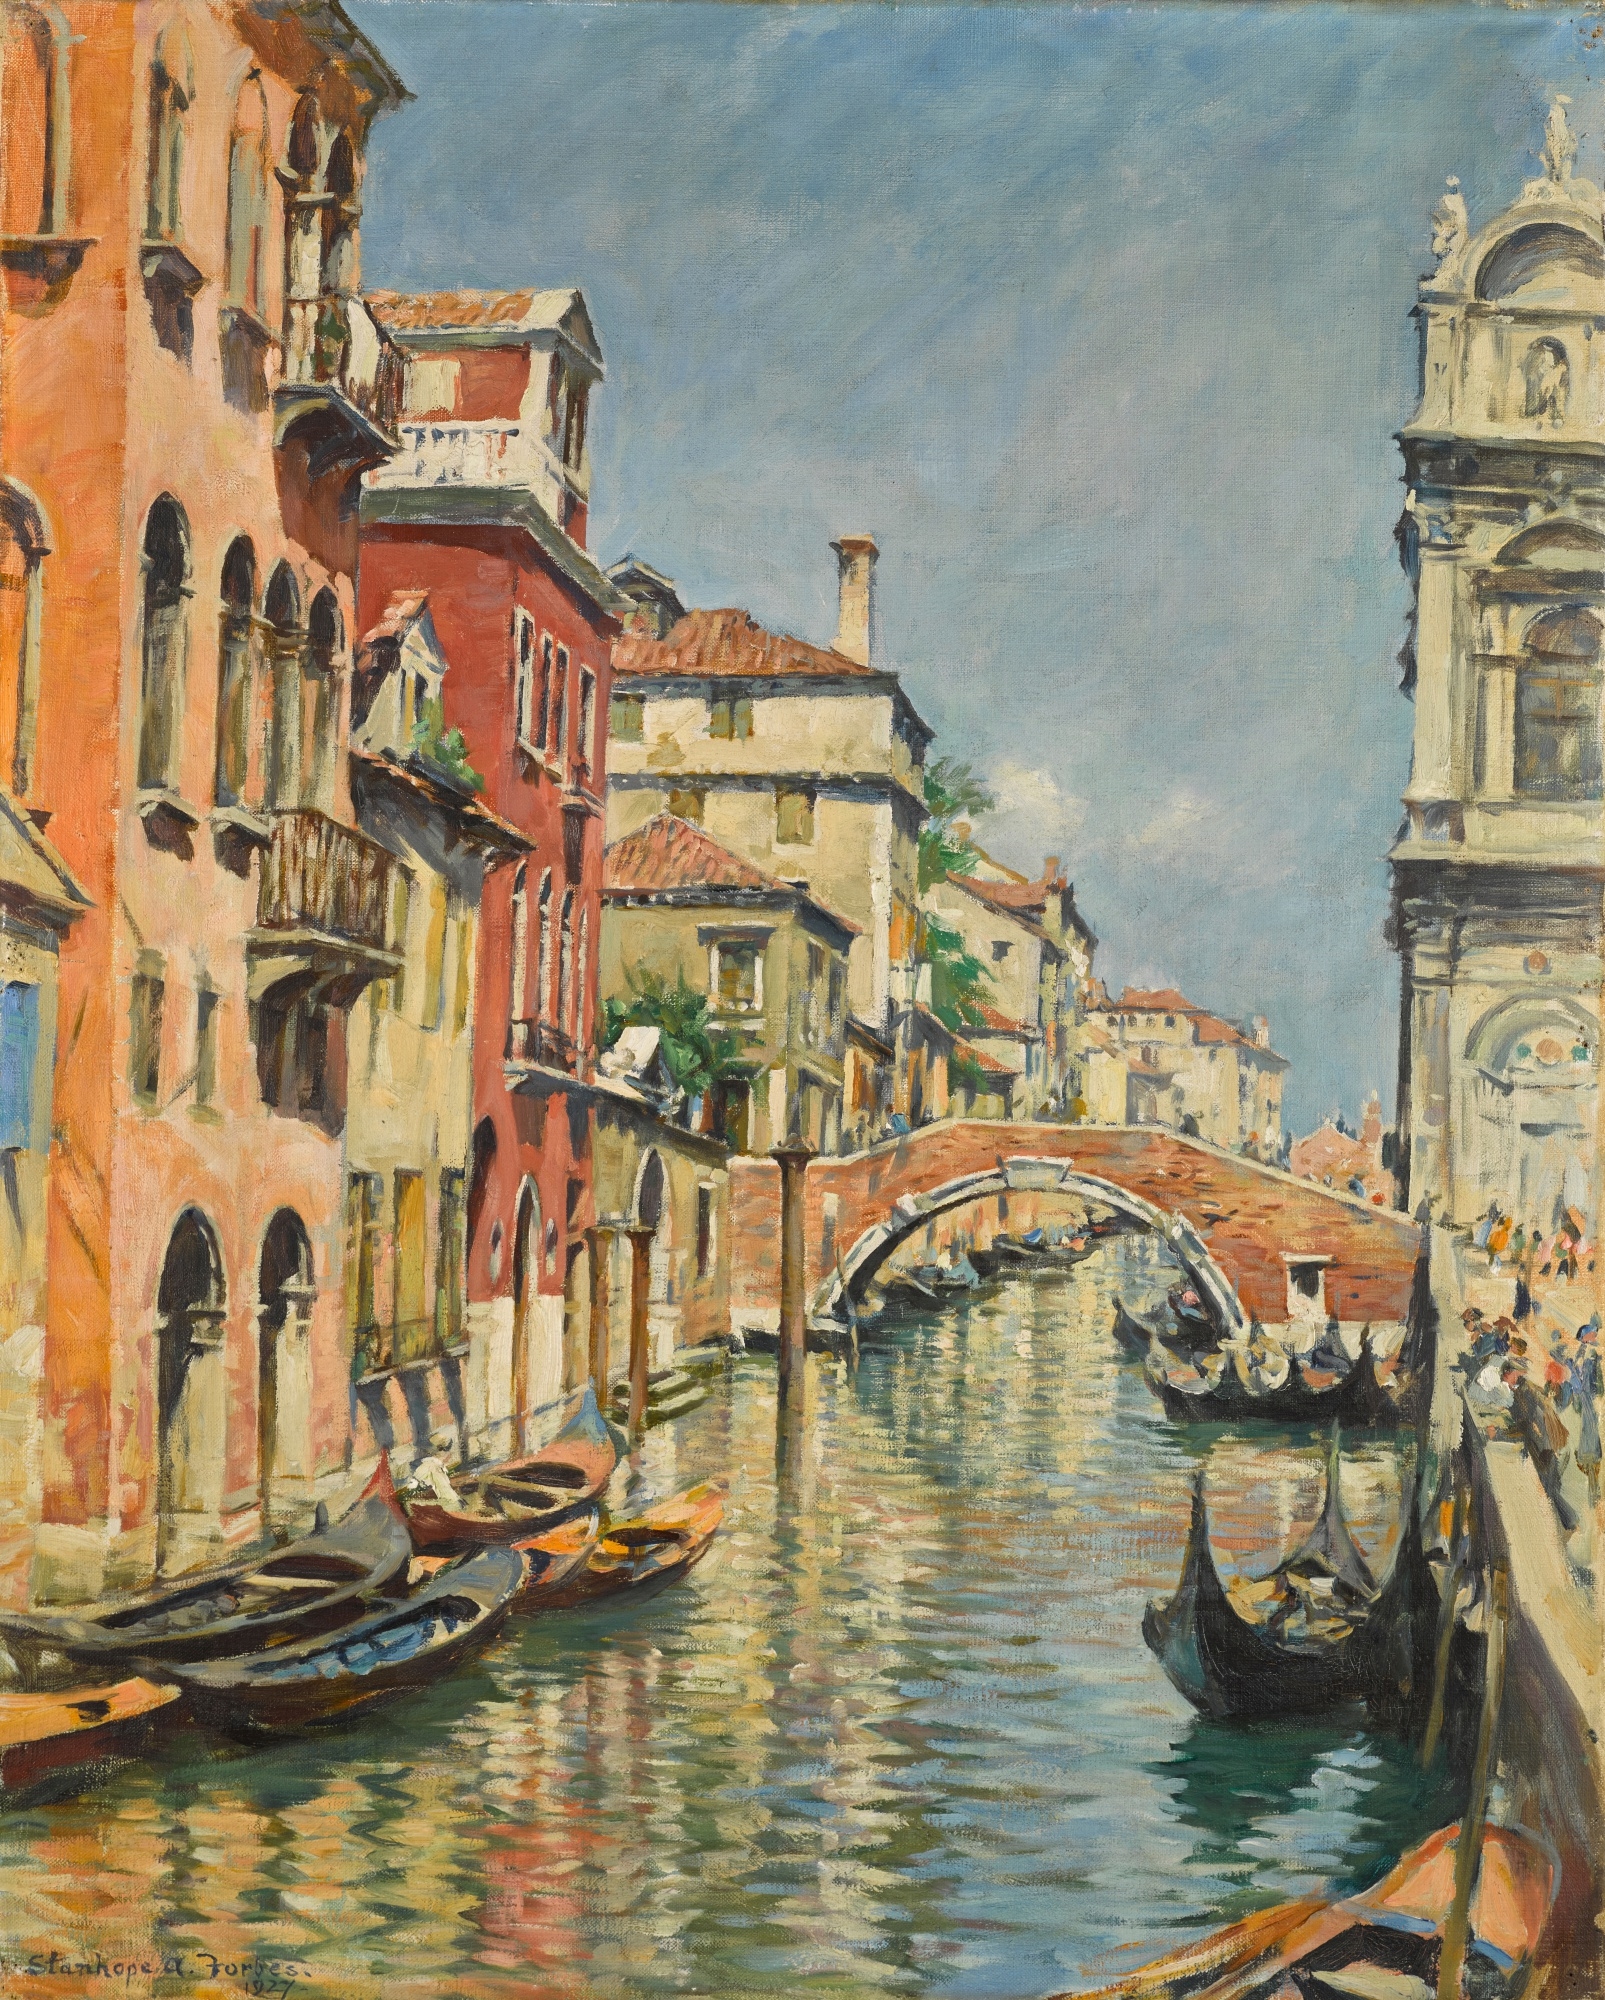 Reflections in the canal, Venice by Stanhope Alexander Forbes, 1927